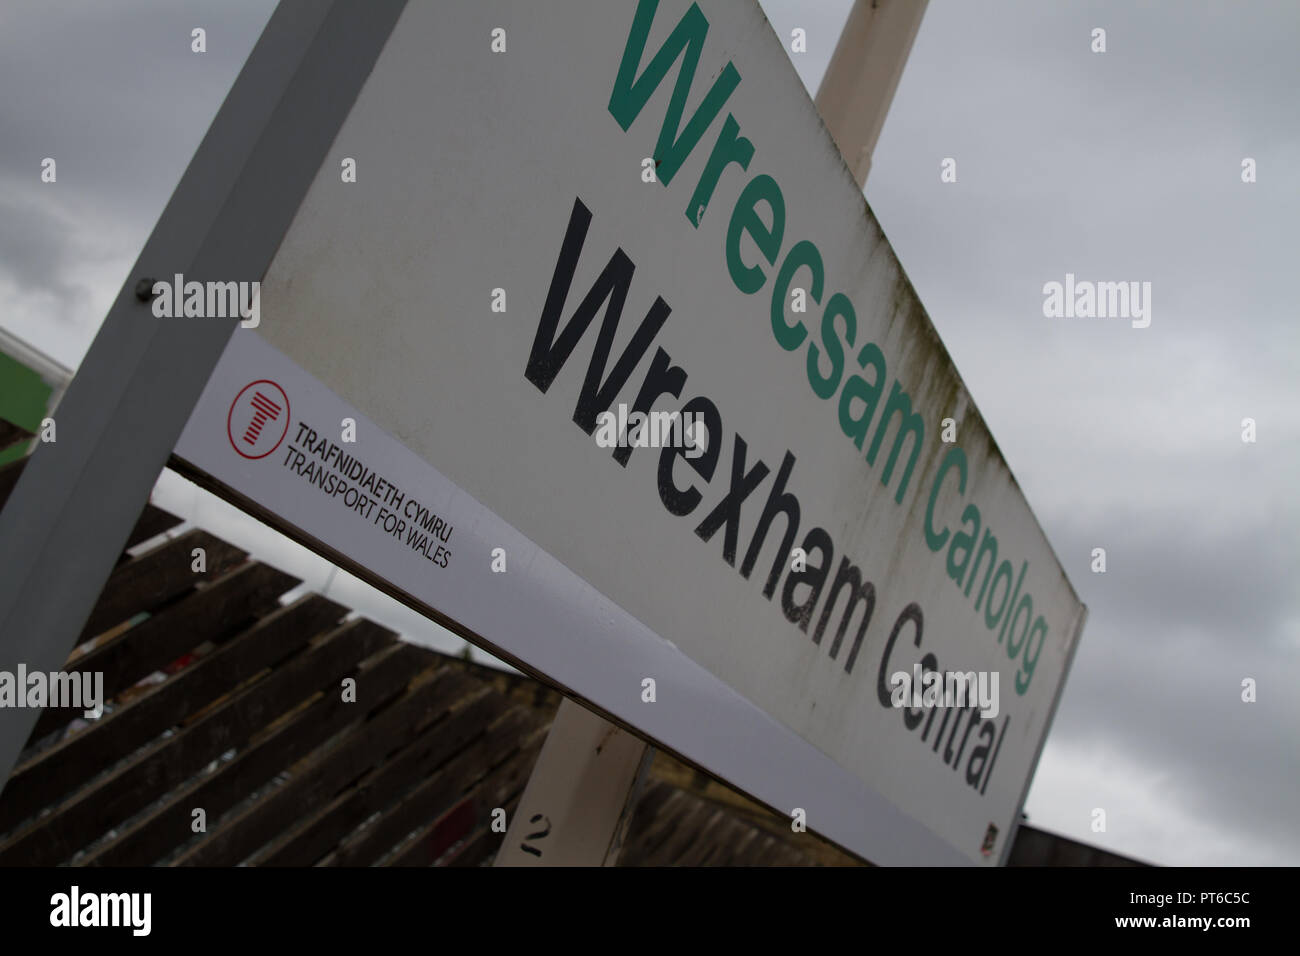 Wrexham Central Railway Station in Wales sign against a grey sky showing Transport for Wales brand carried by the new train operator Keolis Amey. Stock Photo